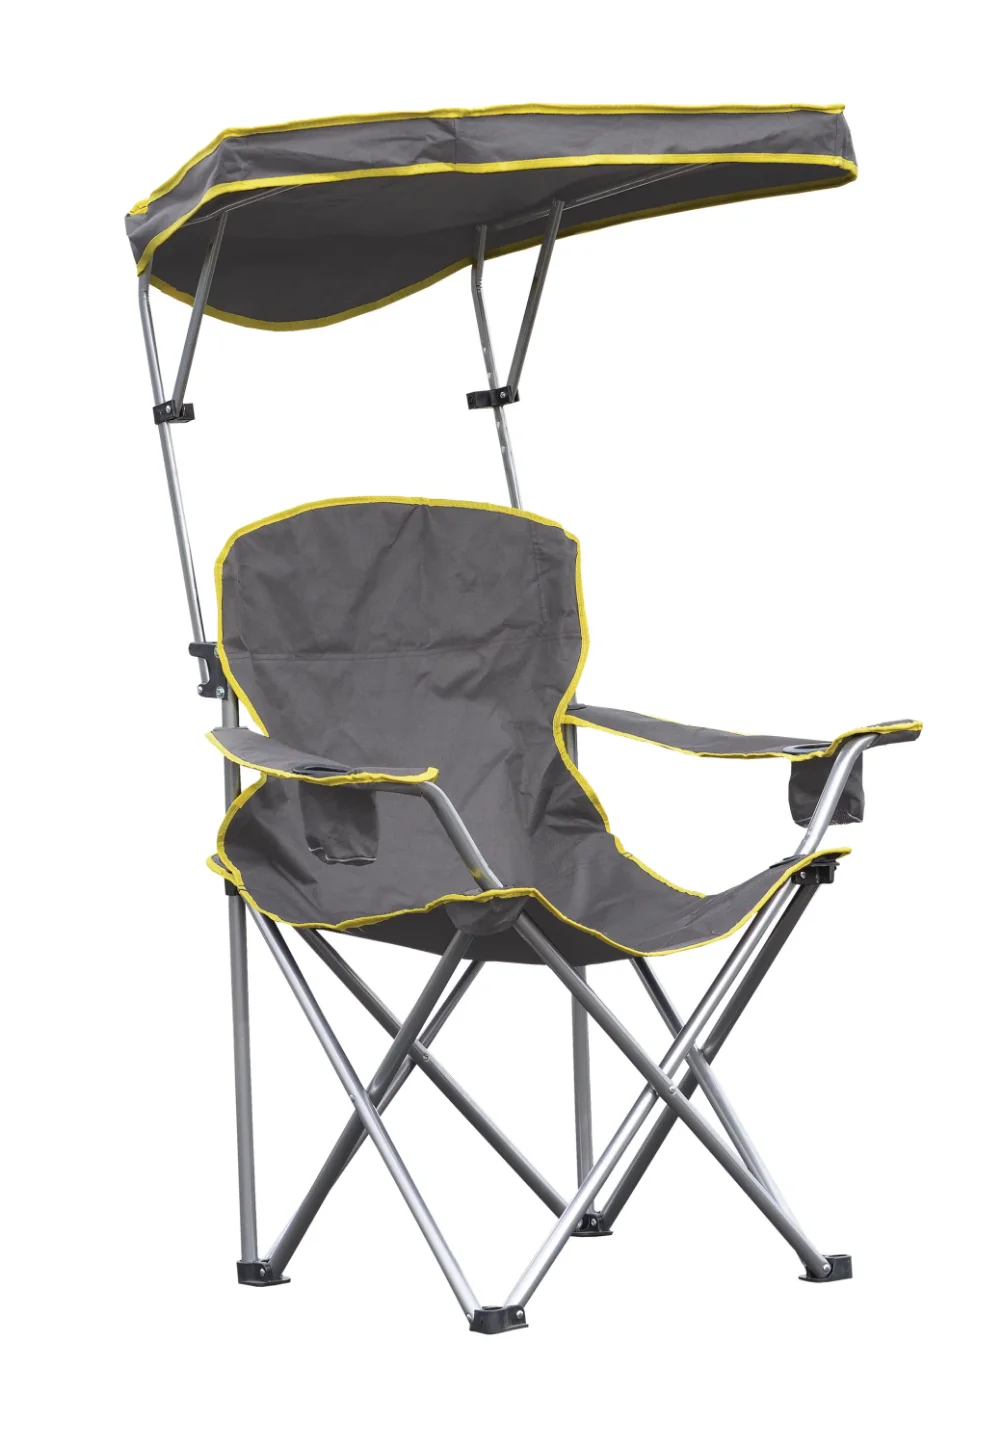 Heavy Duty Max Shade Folding Chair, Grey, Lawn Chairs, Lounge Chairs Outdoor Chair